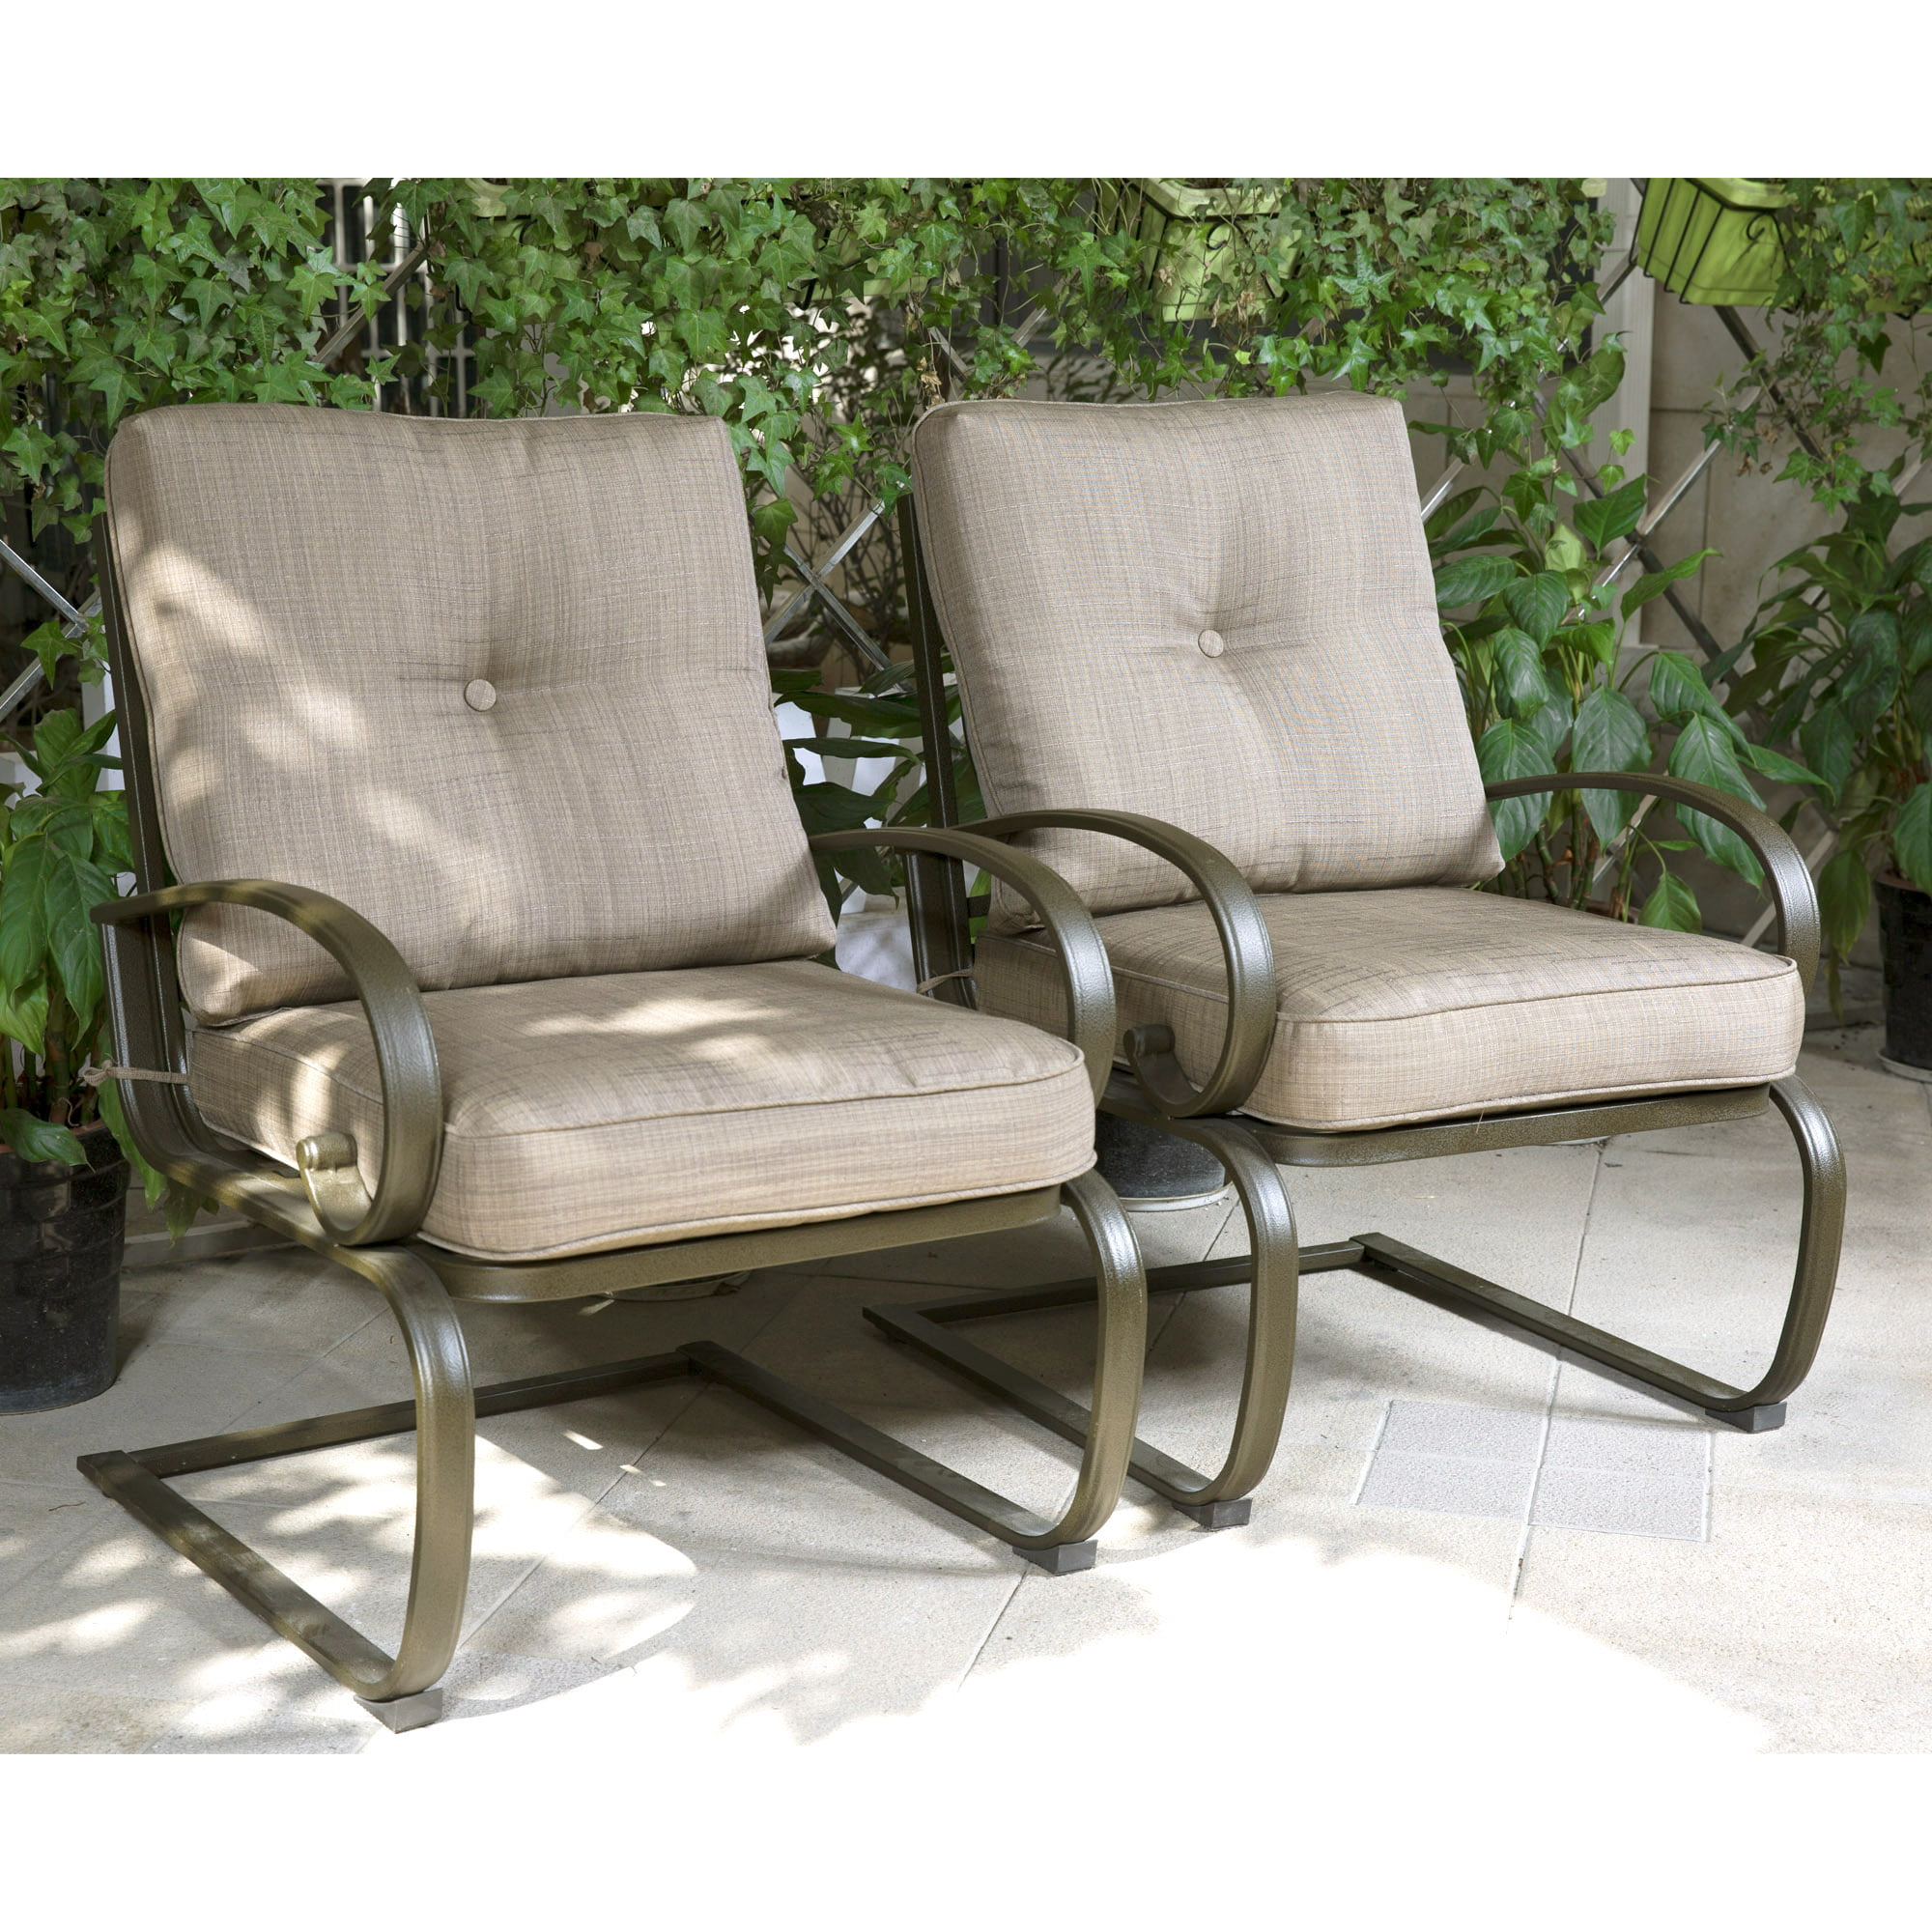 Finefind Set Of 2 Club Chairs Outdoor Patio Wrought Iron Dining Garden Furniture Seating Gradient Brown Cushion Com - Brown Metal Patio Chairs With Cushions